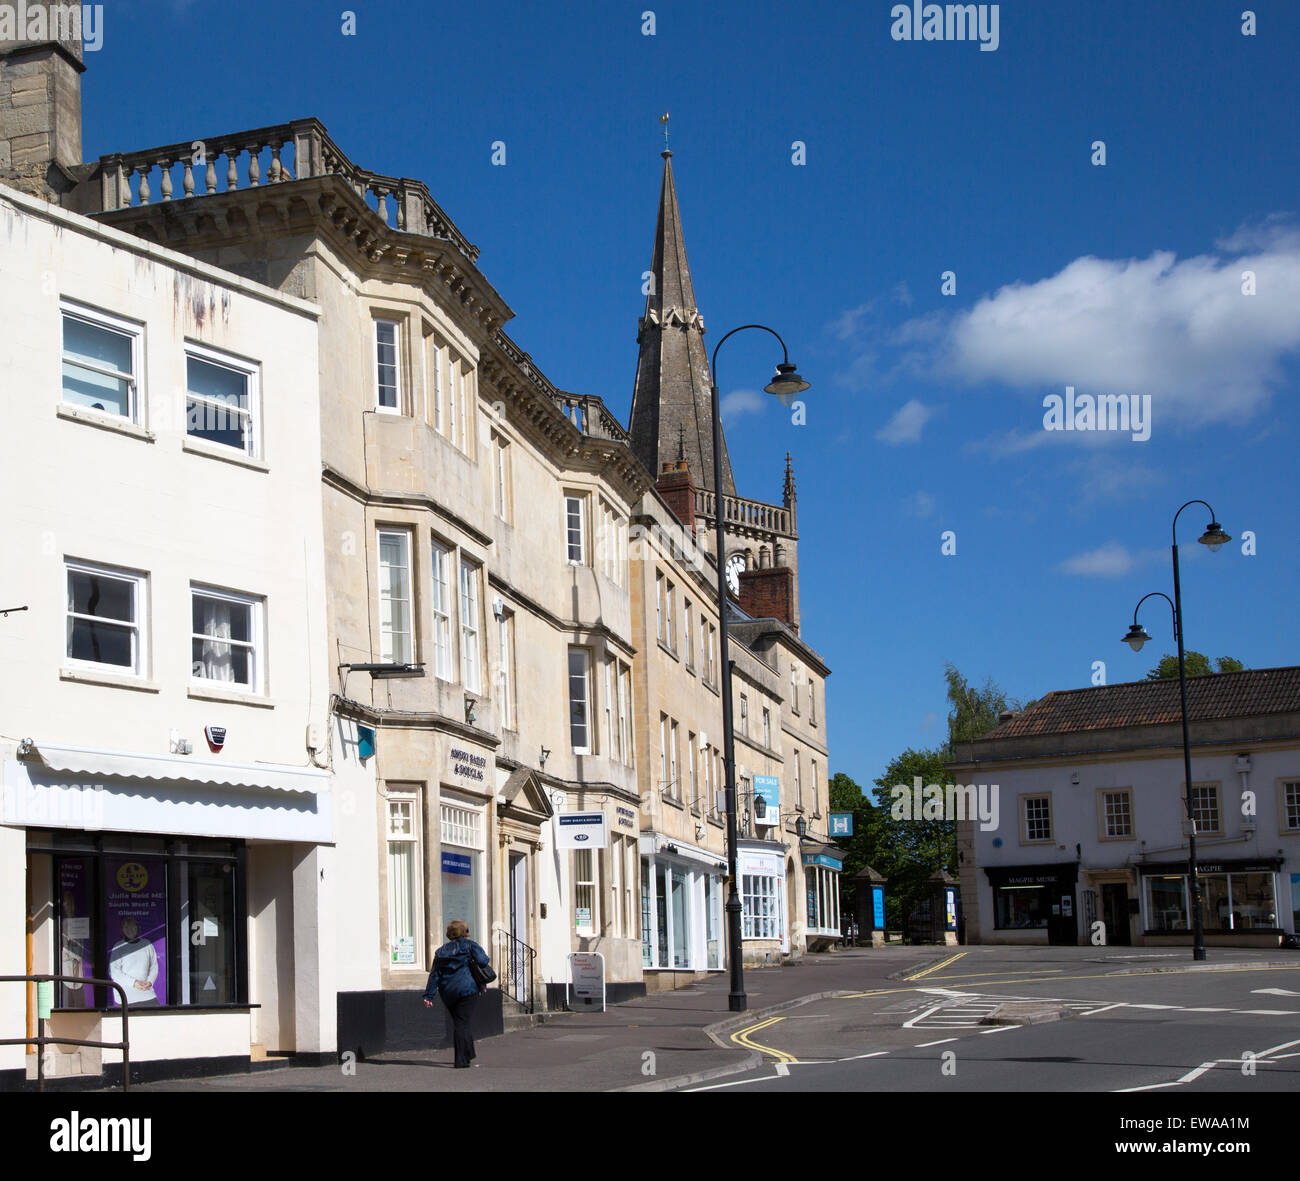 Market place buildings and St Andrew's church spire, Chippenham, Wiltshire, England, UK Stock Photo